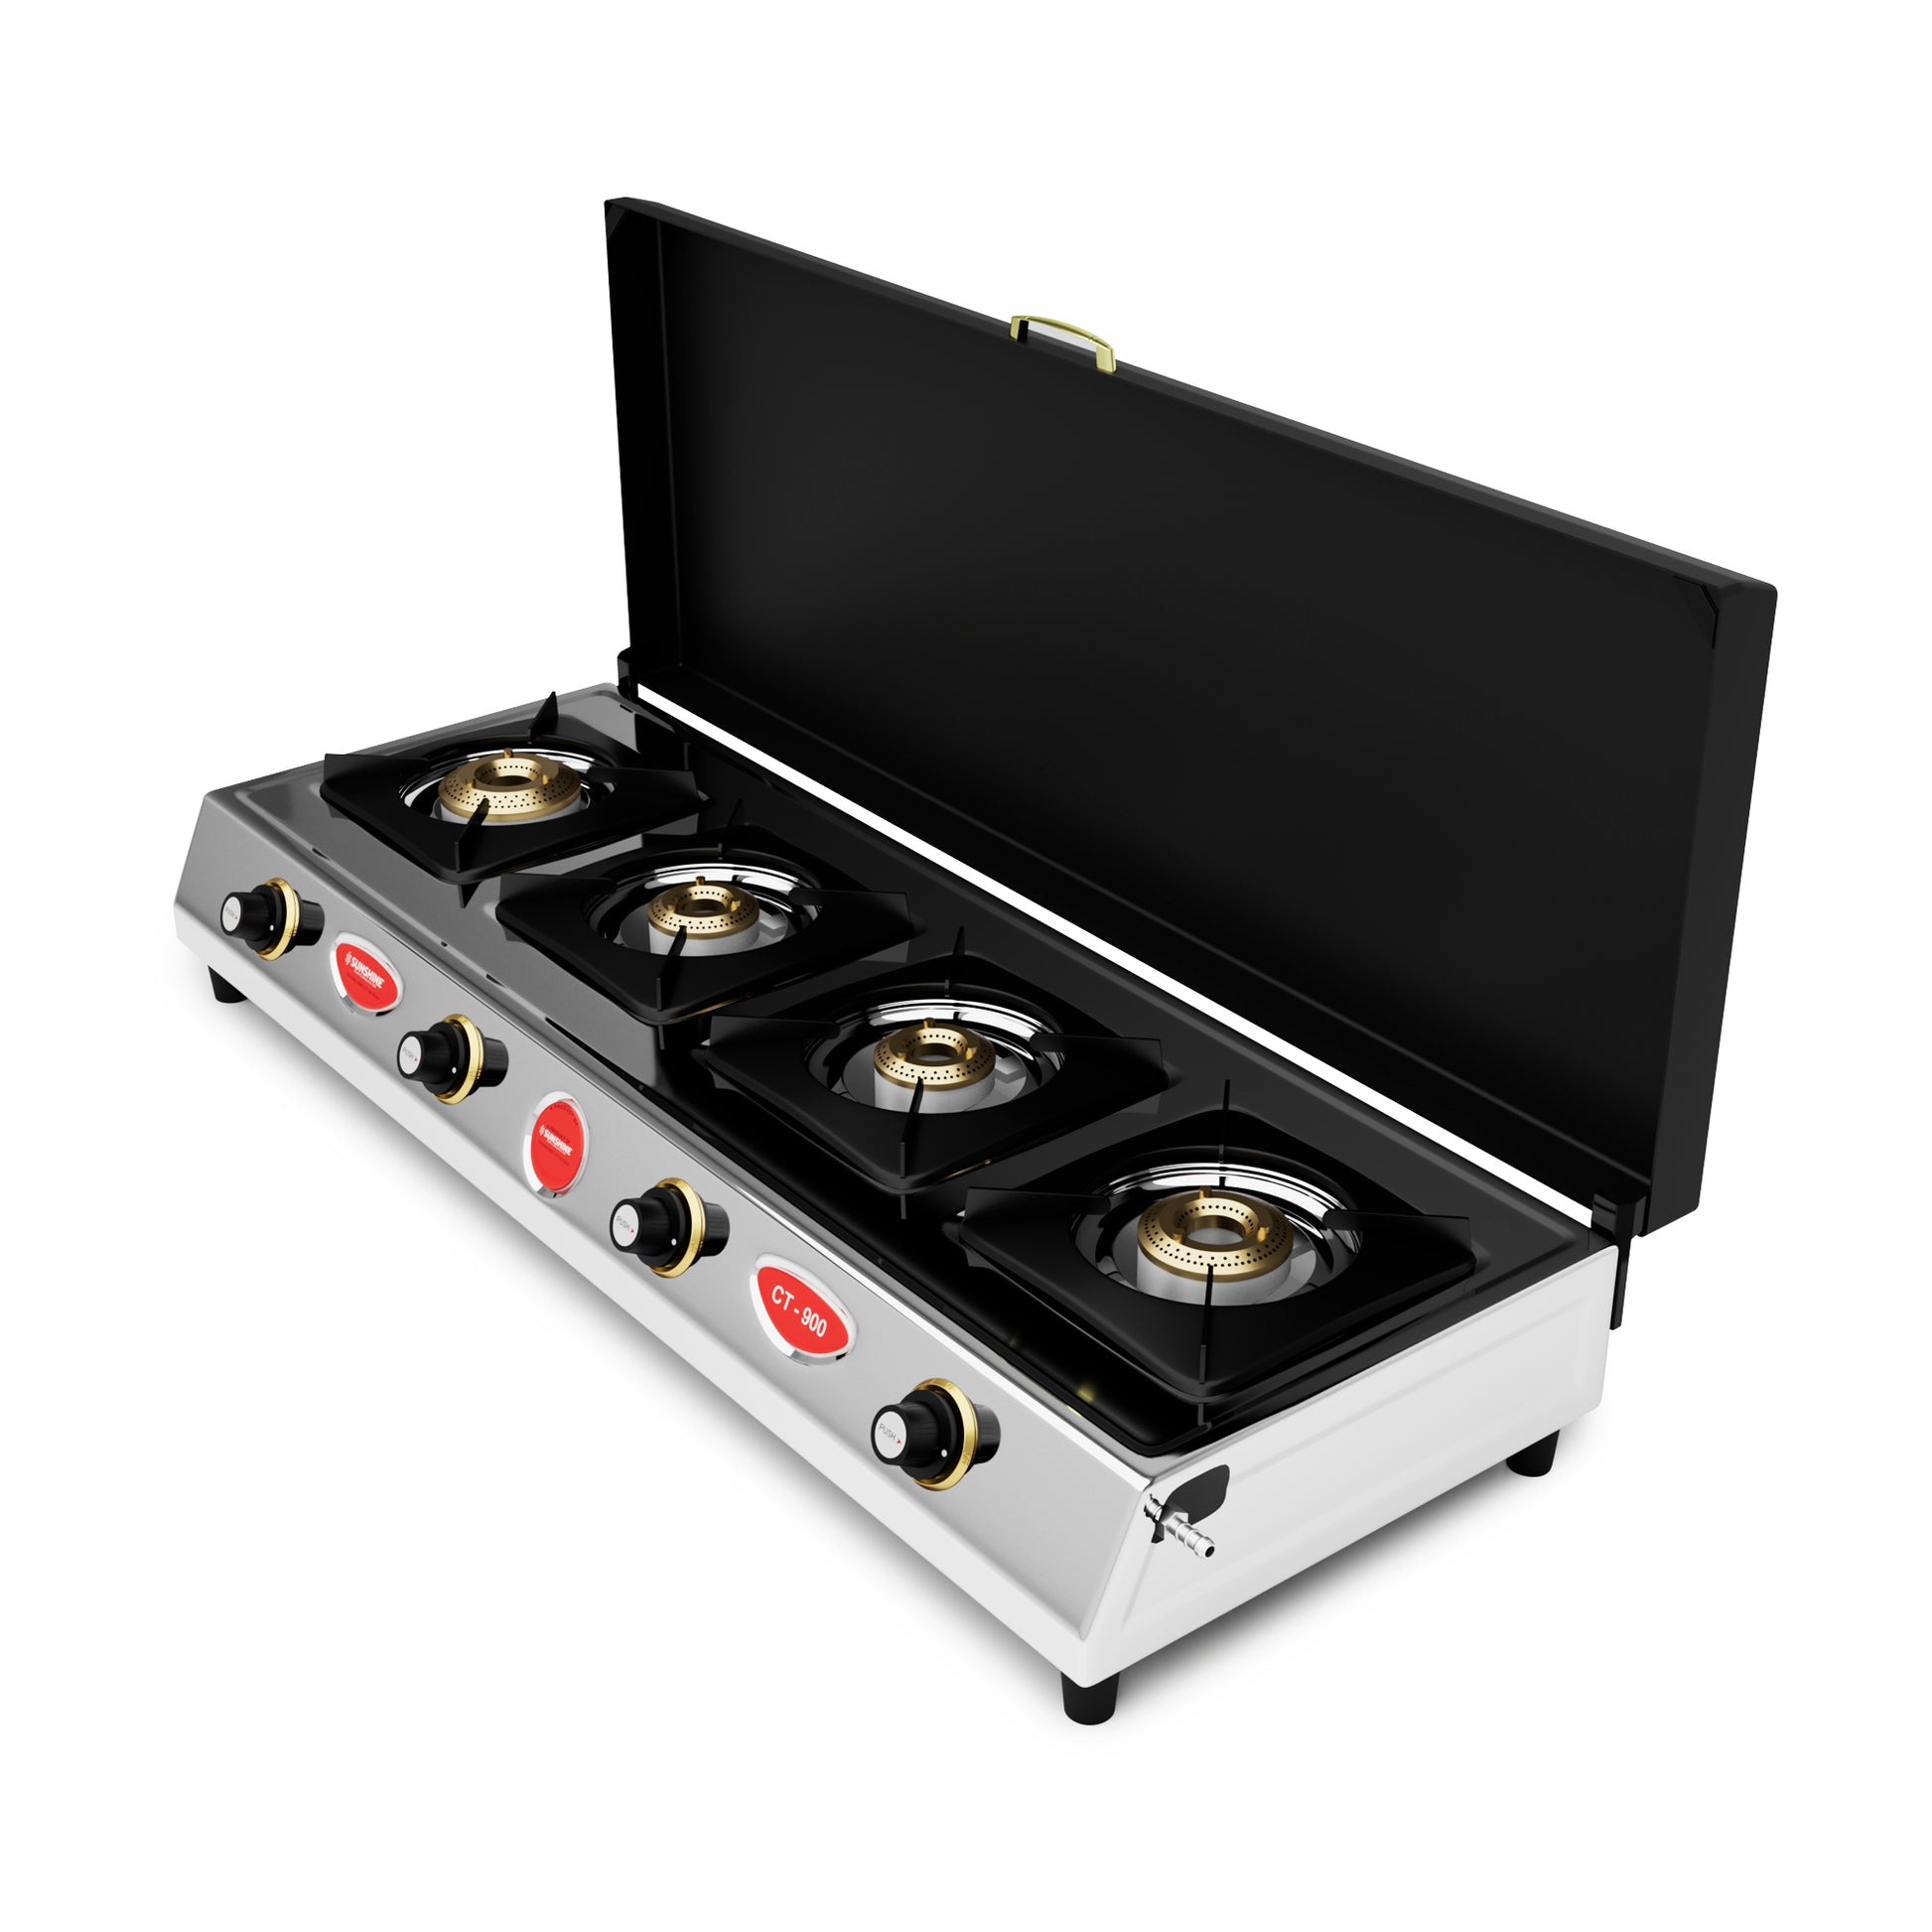 Sunshine CT-900 Cover Four Burner Stainless Steel Gas Stove